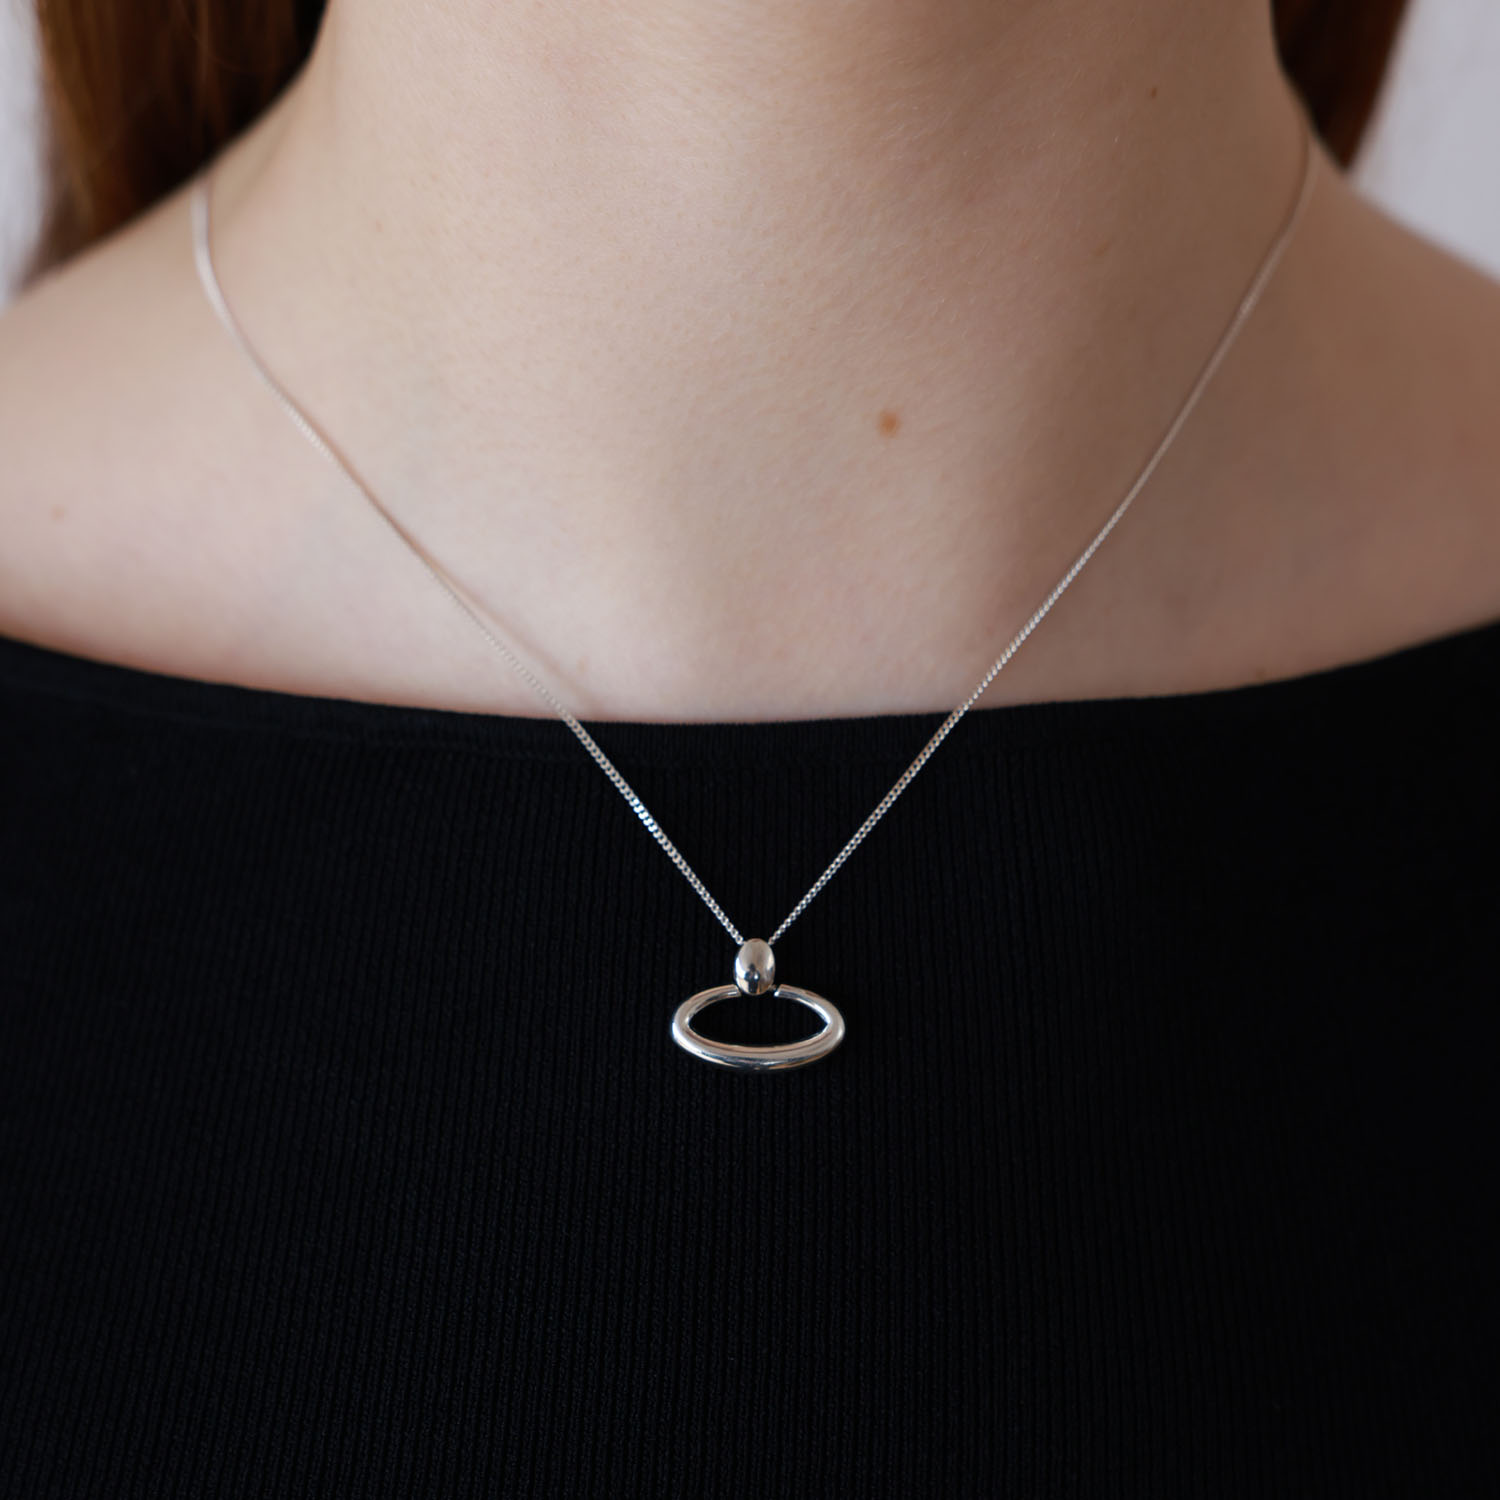 Oval ring neck